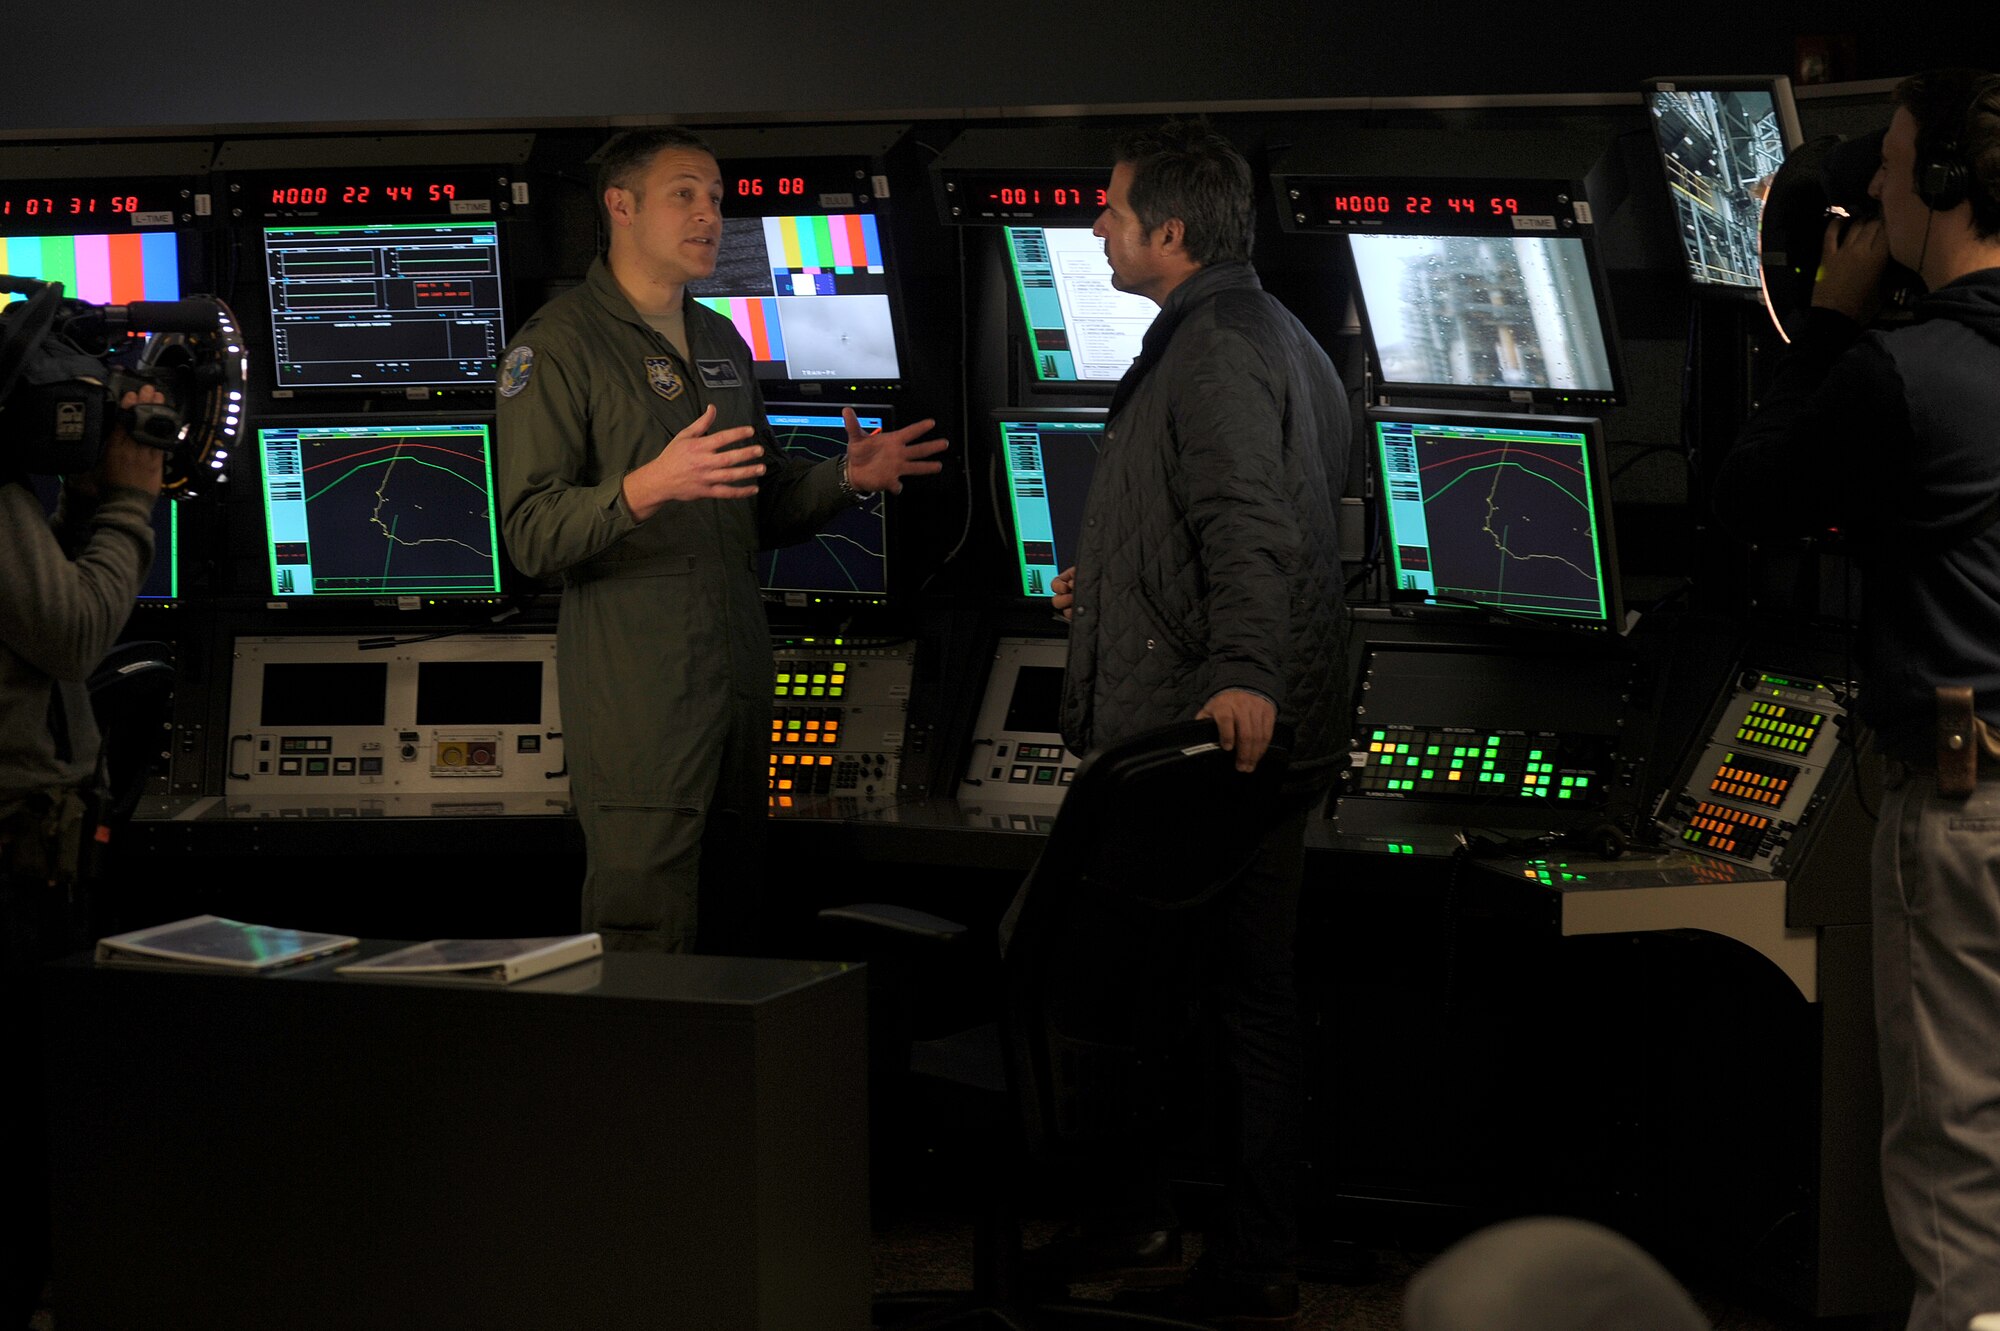 VANDENBERG AIR FORCE BASE, Calif. -- Capt. Pierre Gregoire, 2nd Range Operations Squadron operations flight commander, talks to Don Wildman, television host for the Travel Channel's show Off Limits, about range safety at the Western Range Operations Control Center here March 30, 2012. The WROCC was featured to demonstrate how the Air Force launches rockets safely. (U.S. Air Force photo/Staff Sgt. Andrew Satran) 

